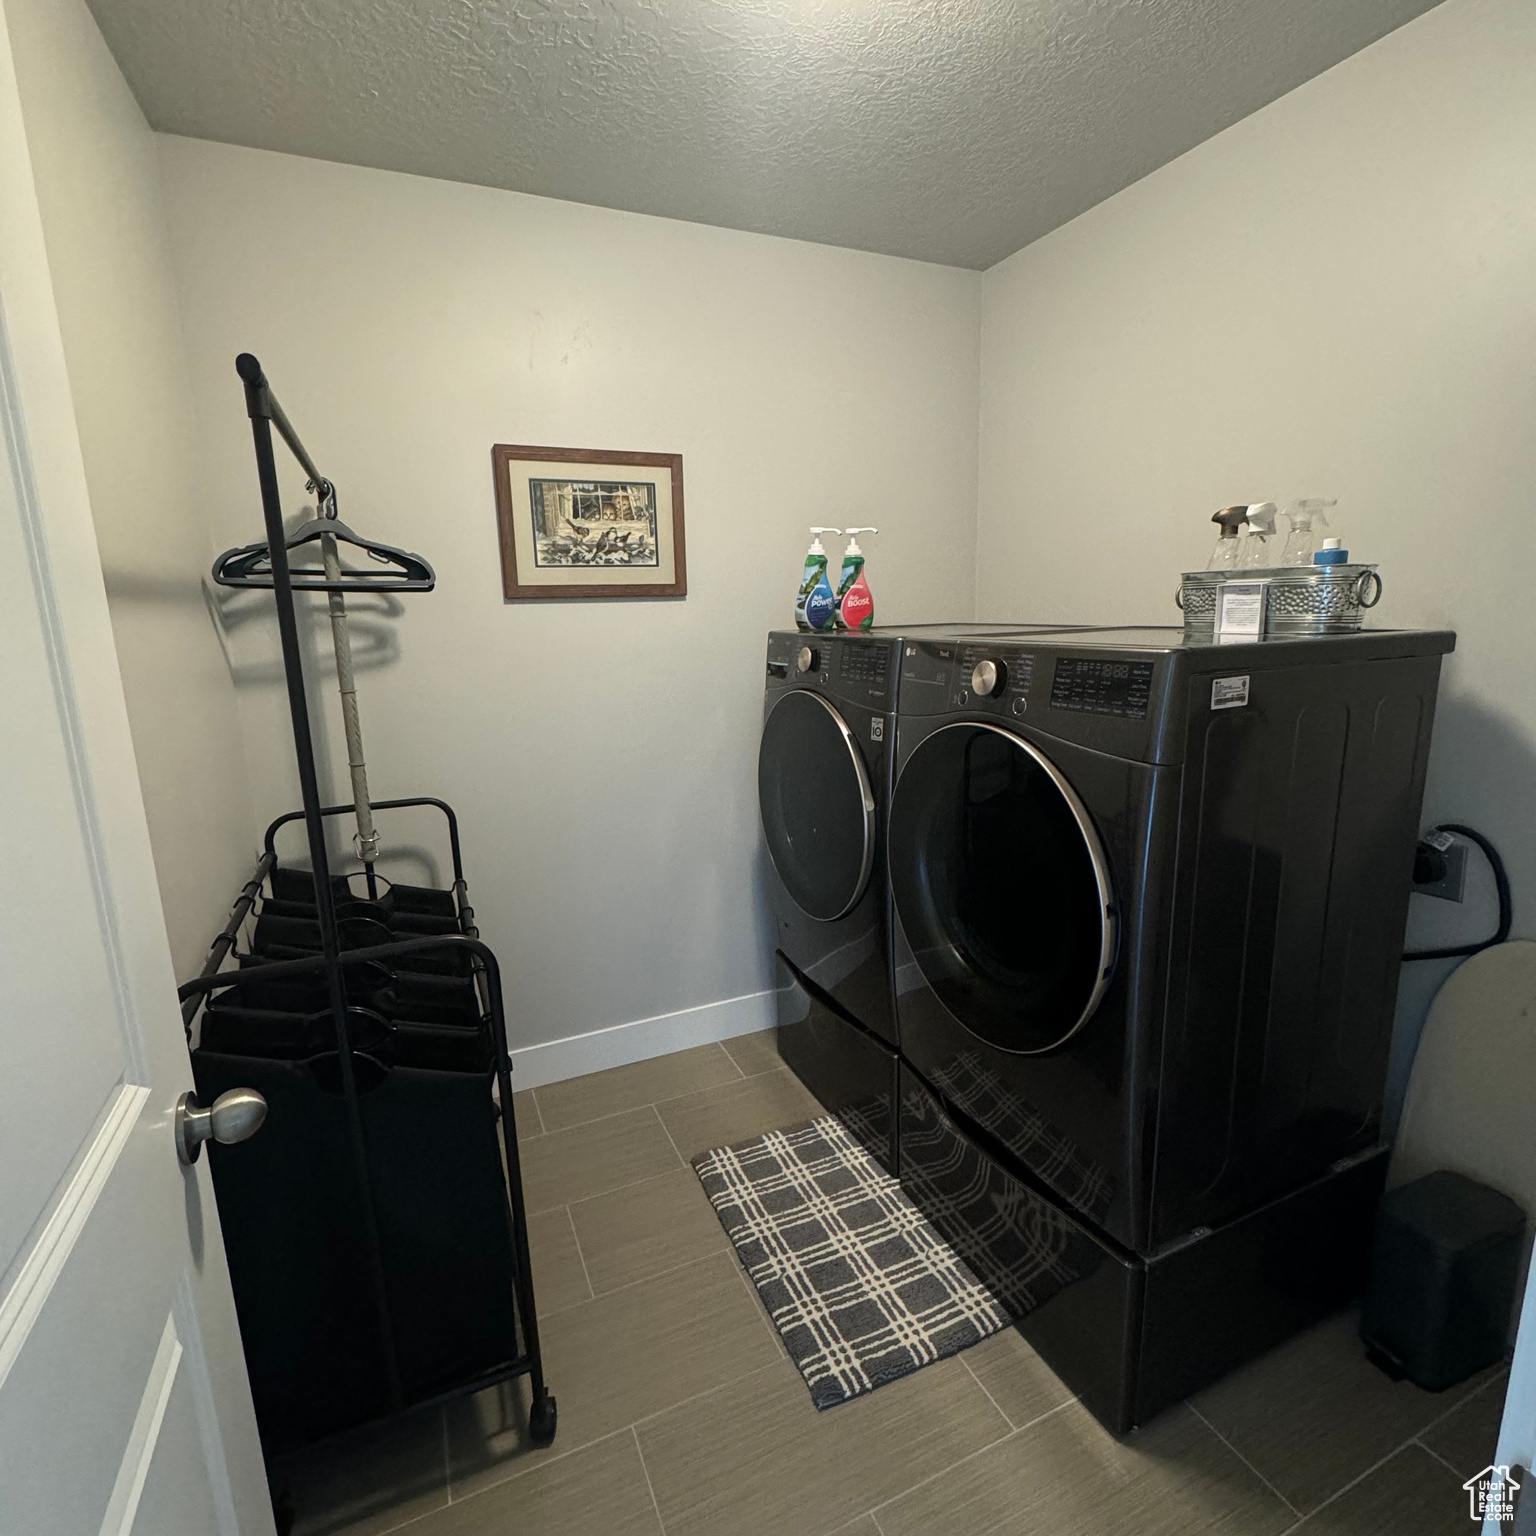 Clothes washing area featuring washing machine and dryer, tile floors, and a textured ceiling